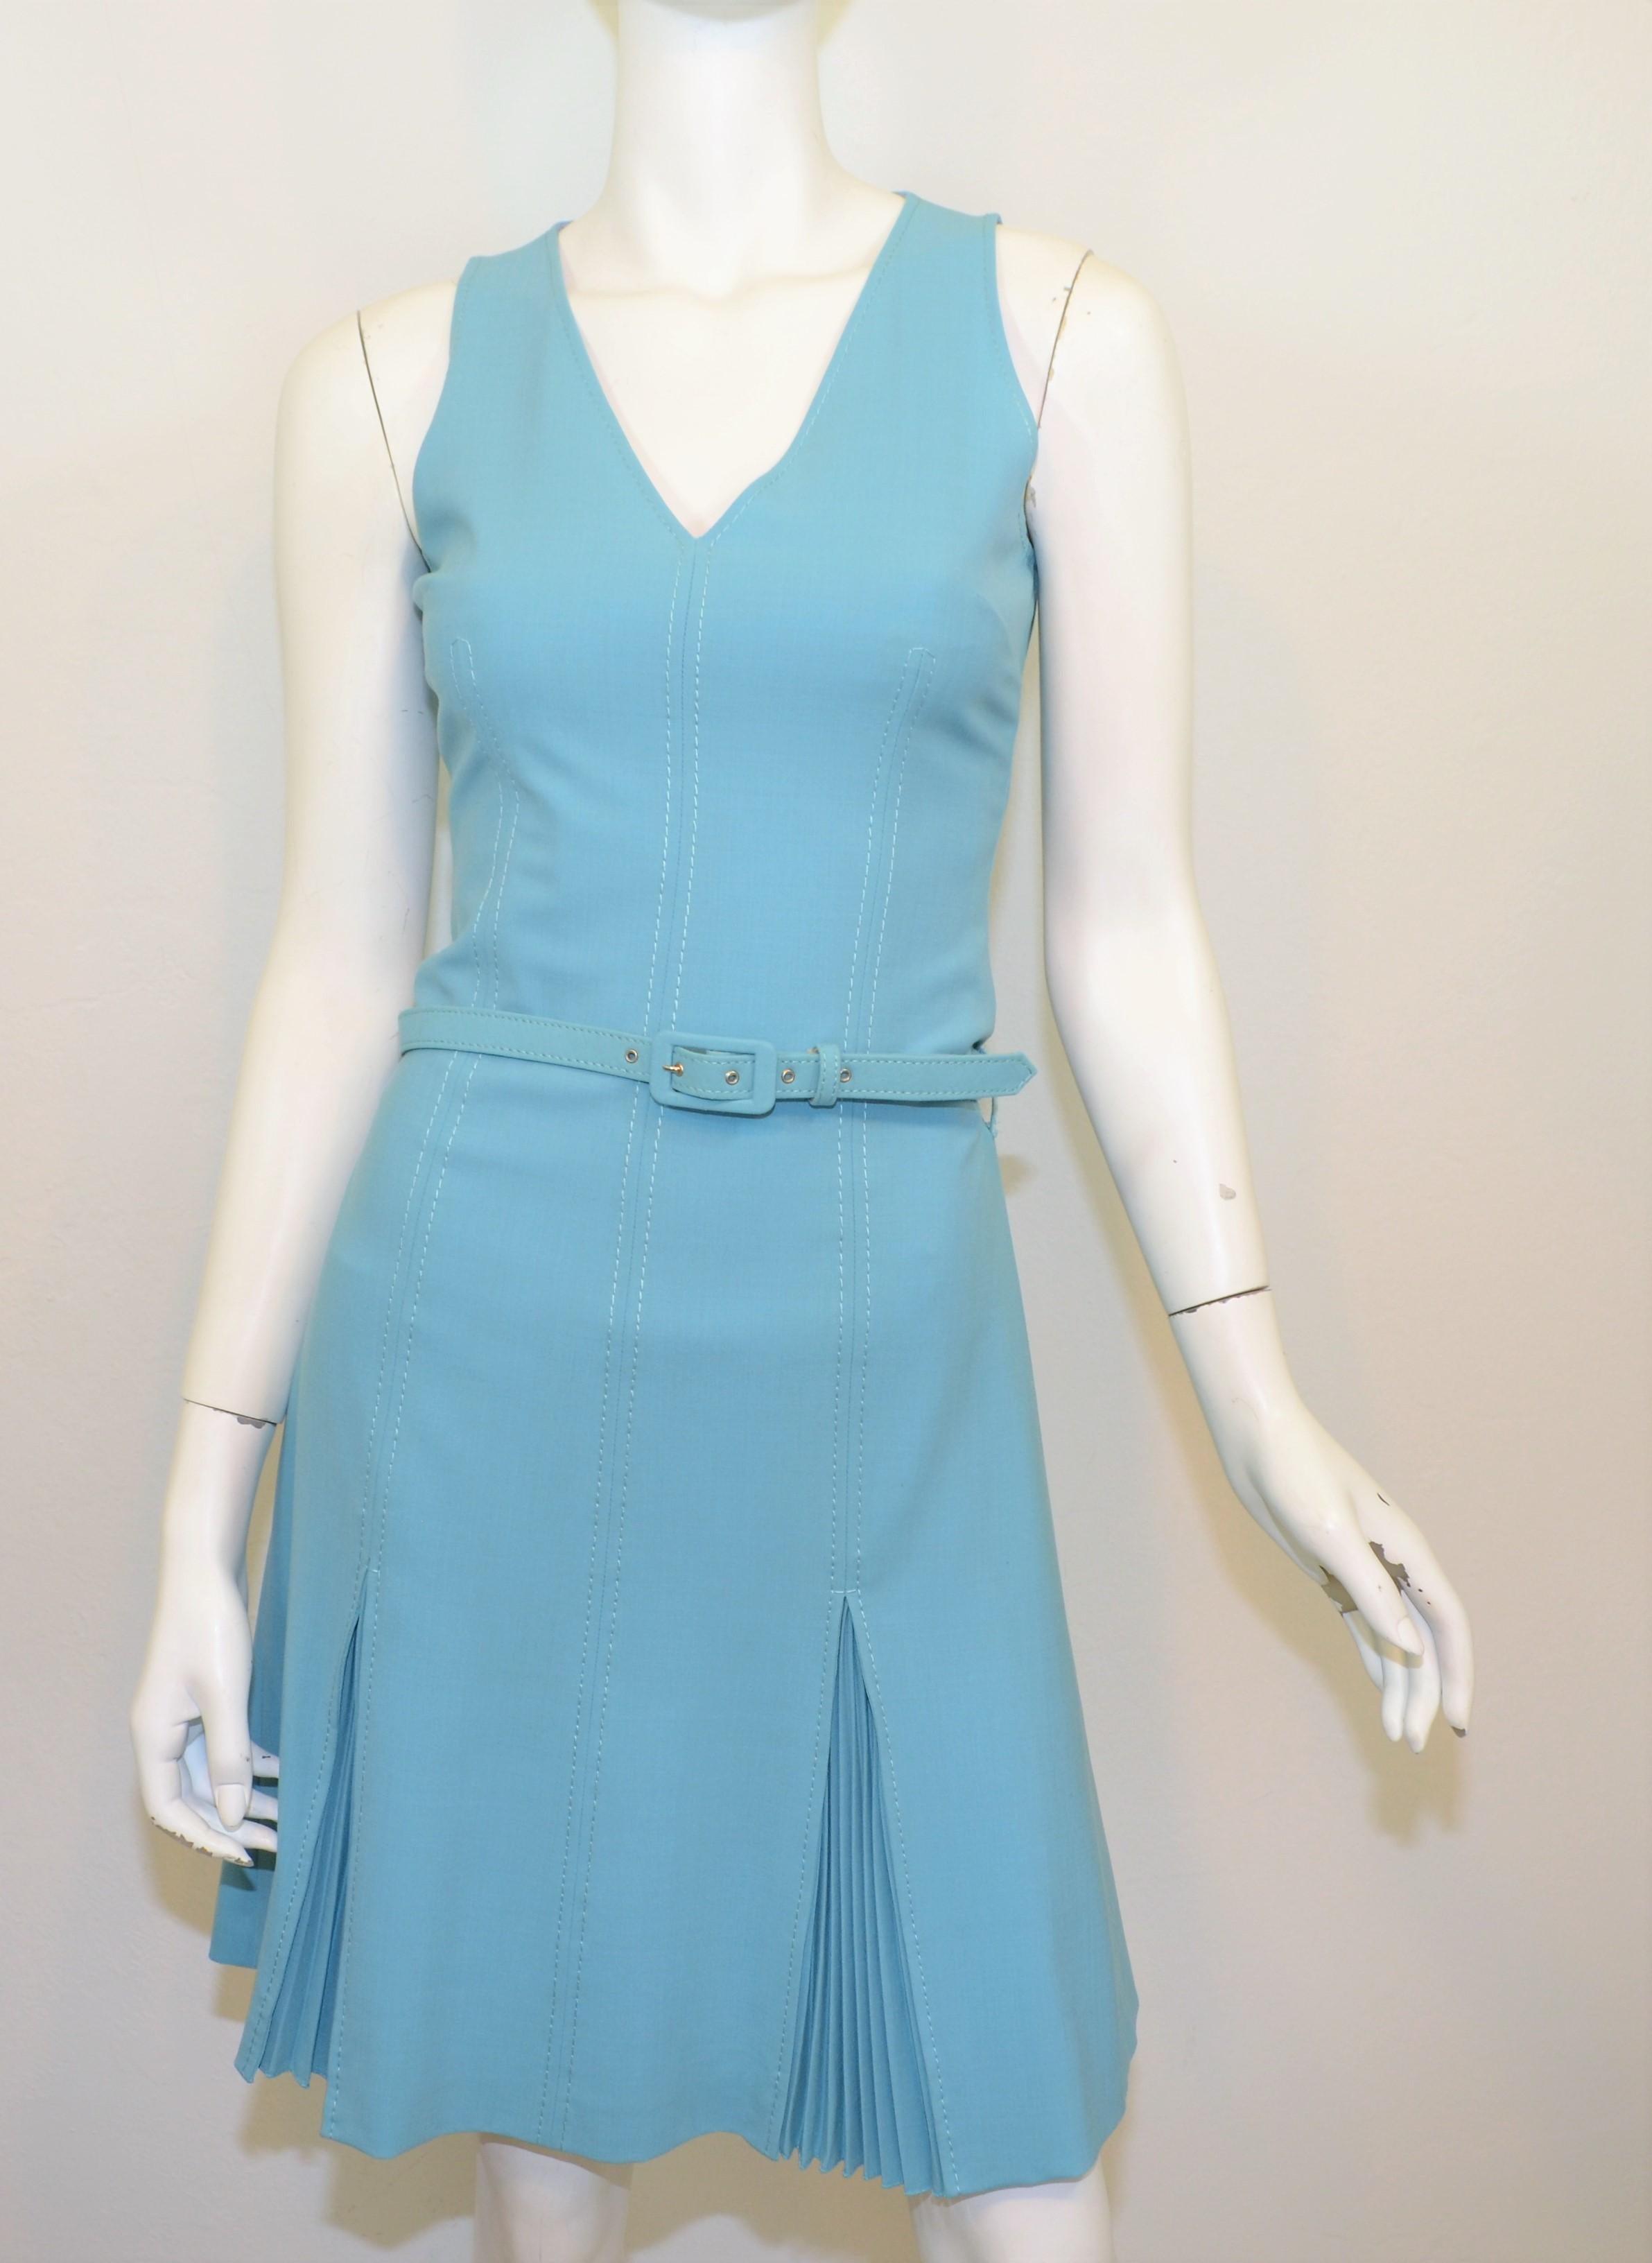 Vintage Moschino dress is featured in a light blue color with white stitching and has a back zipper fastening along with a belt. Dress has a pleated skirt and is fully lined. Made in Italy, US size 6, composed with mixed fibers.